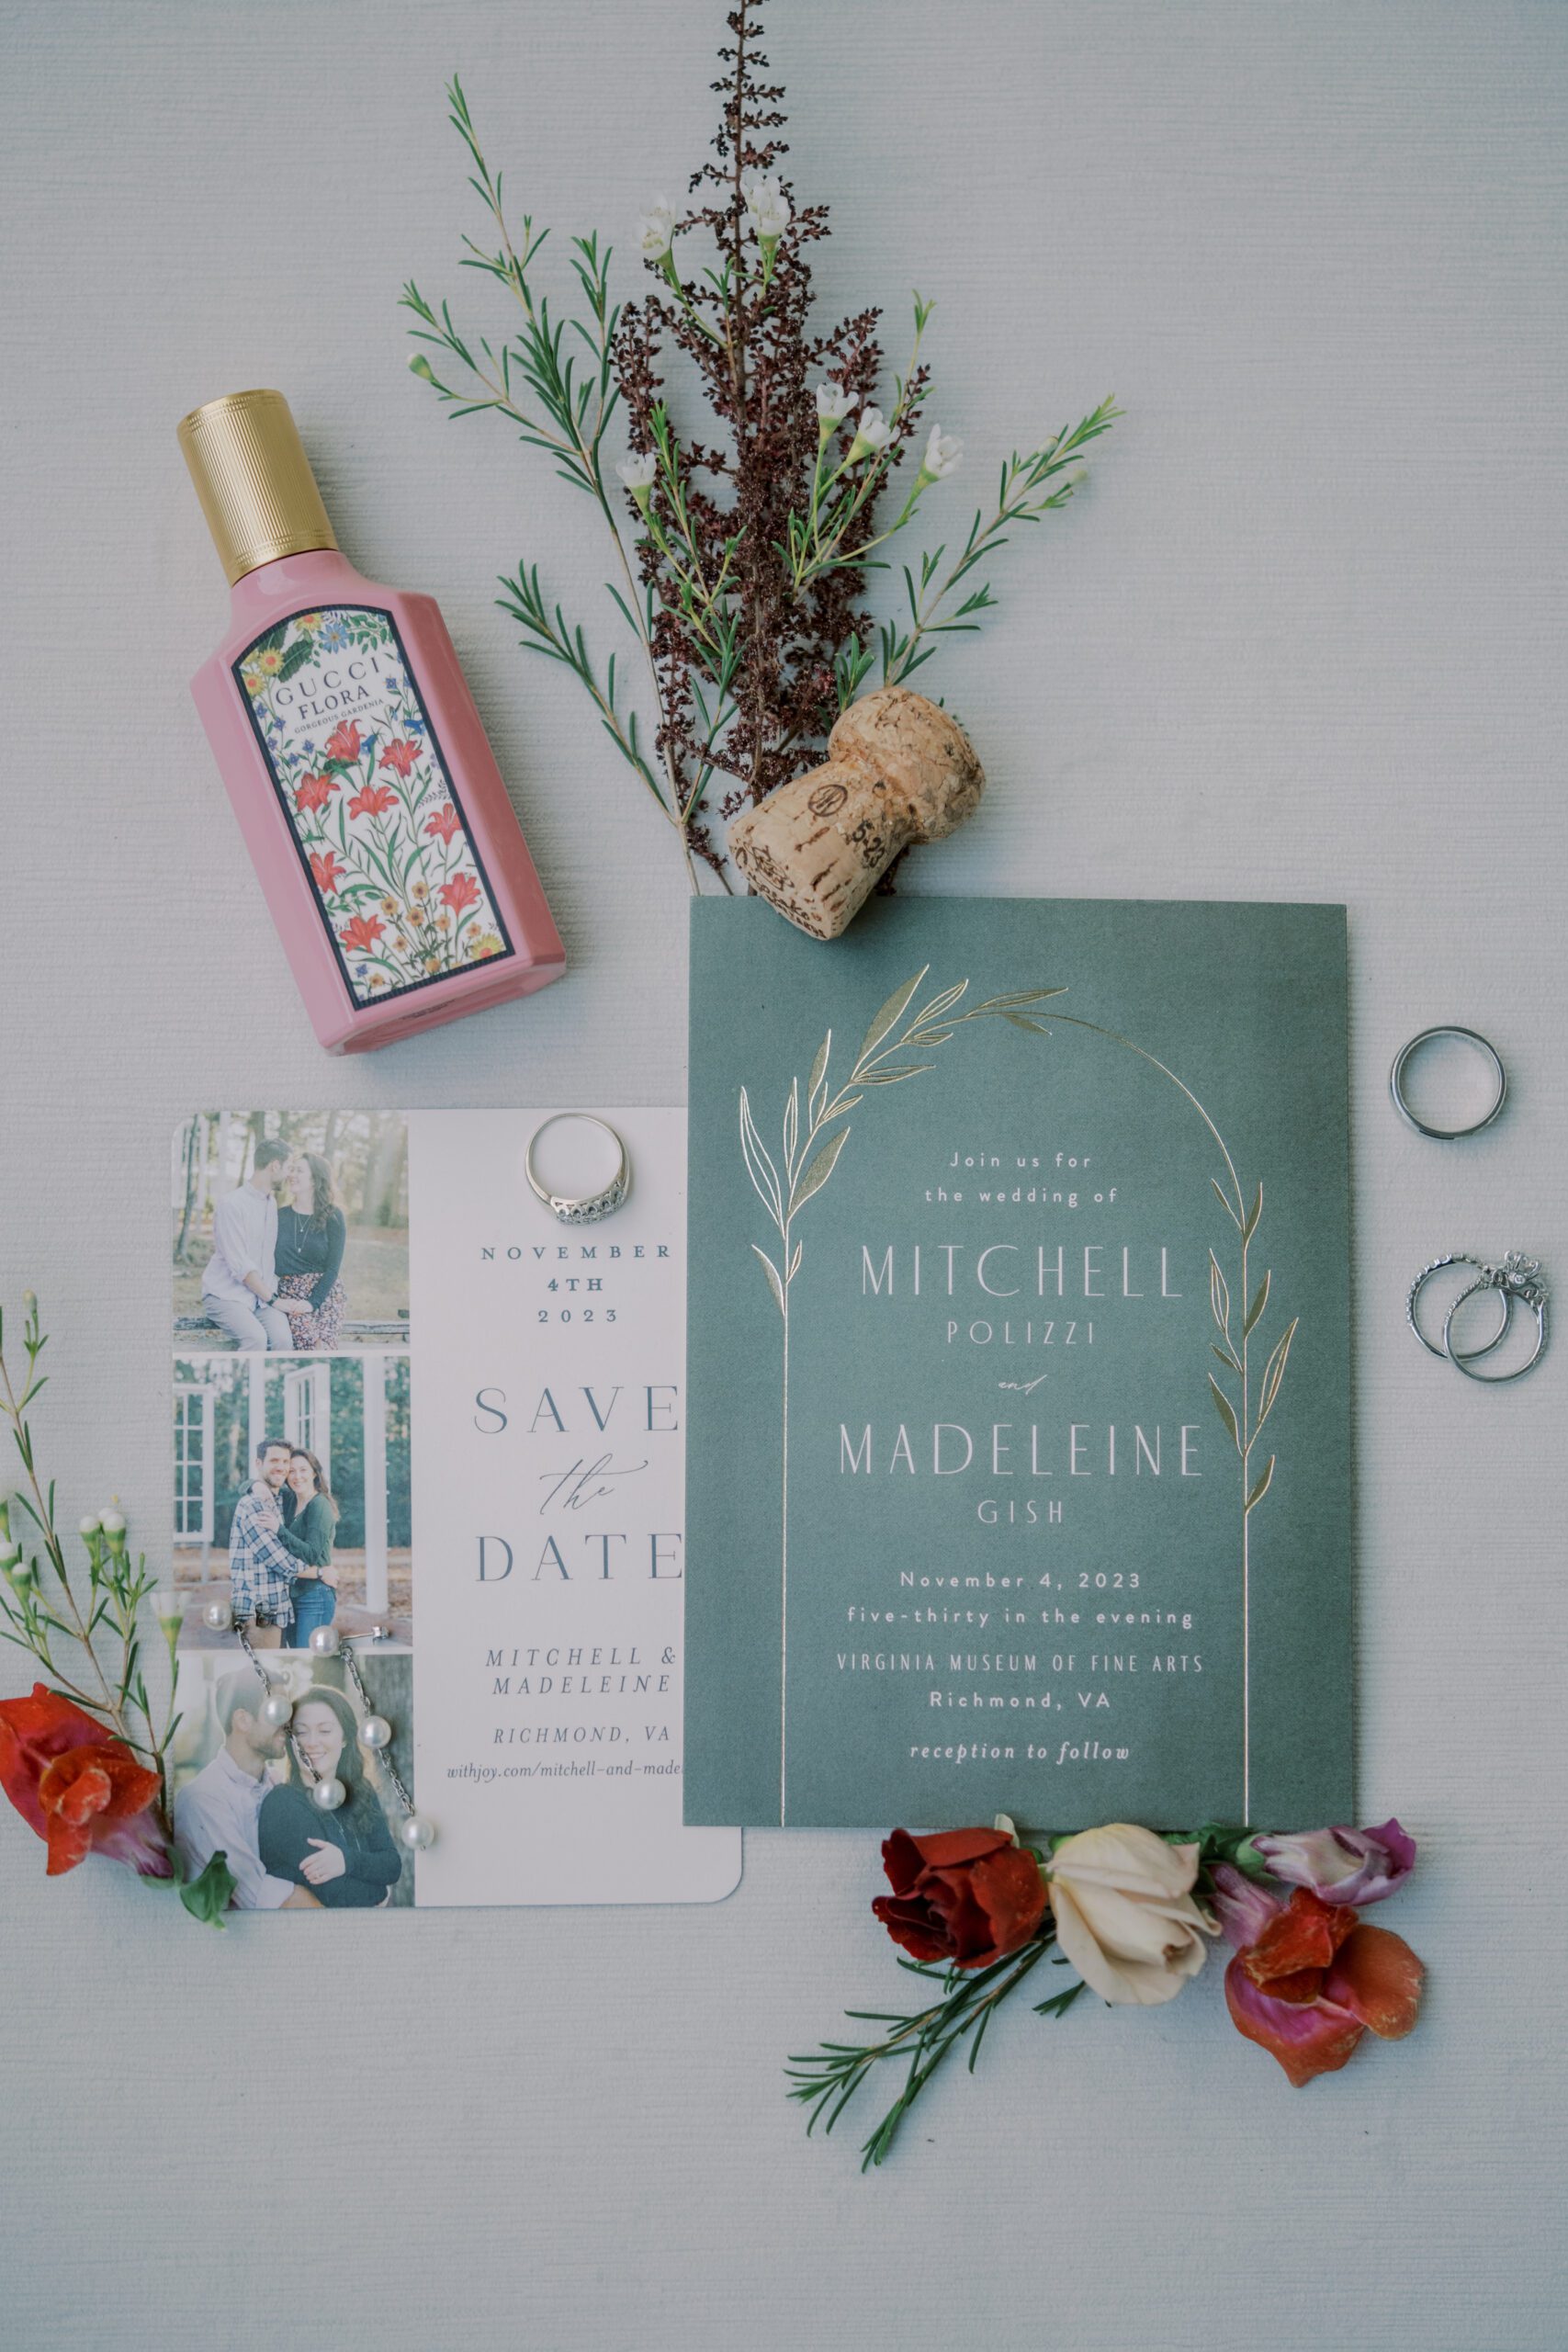 Detail photo of the couple's save the date card and wedding invitation, also pictured are the couple's rings, a perfume, cork, and some flowers